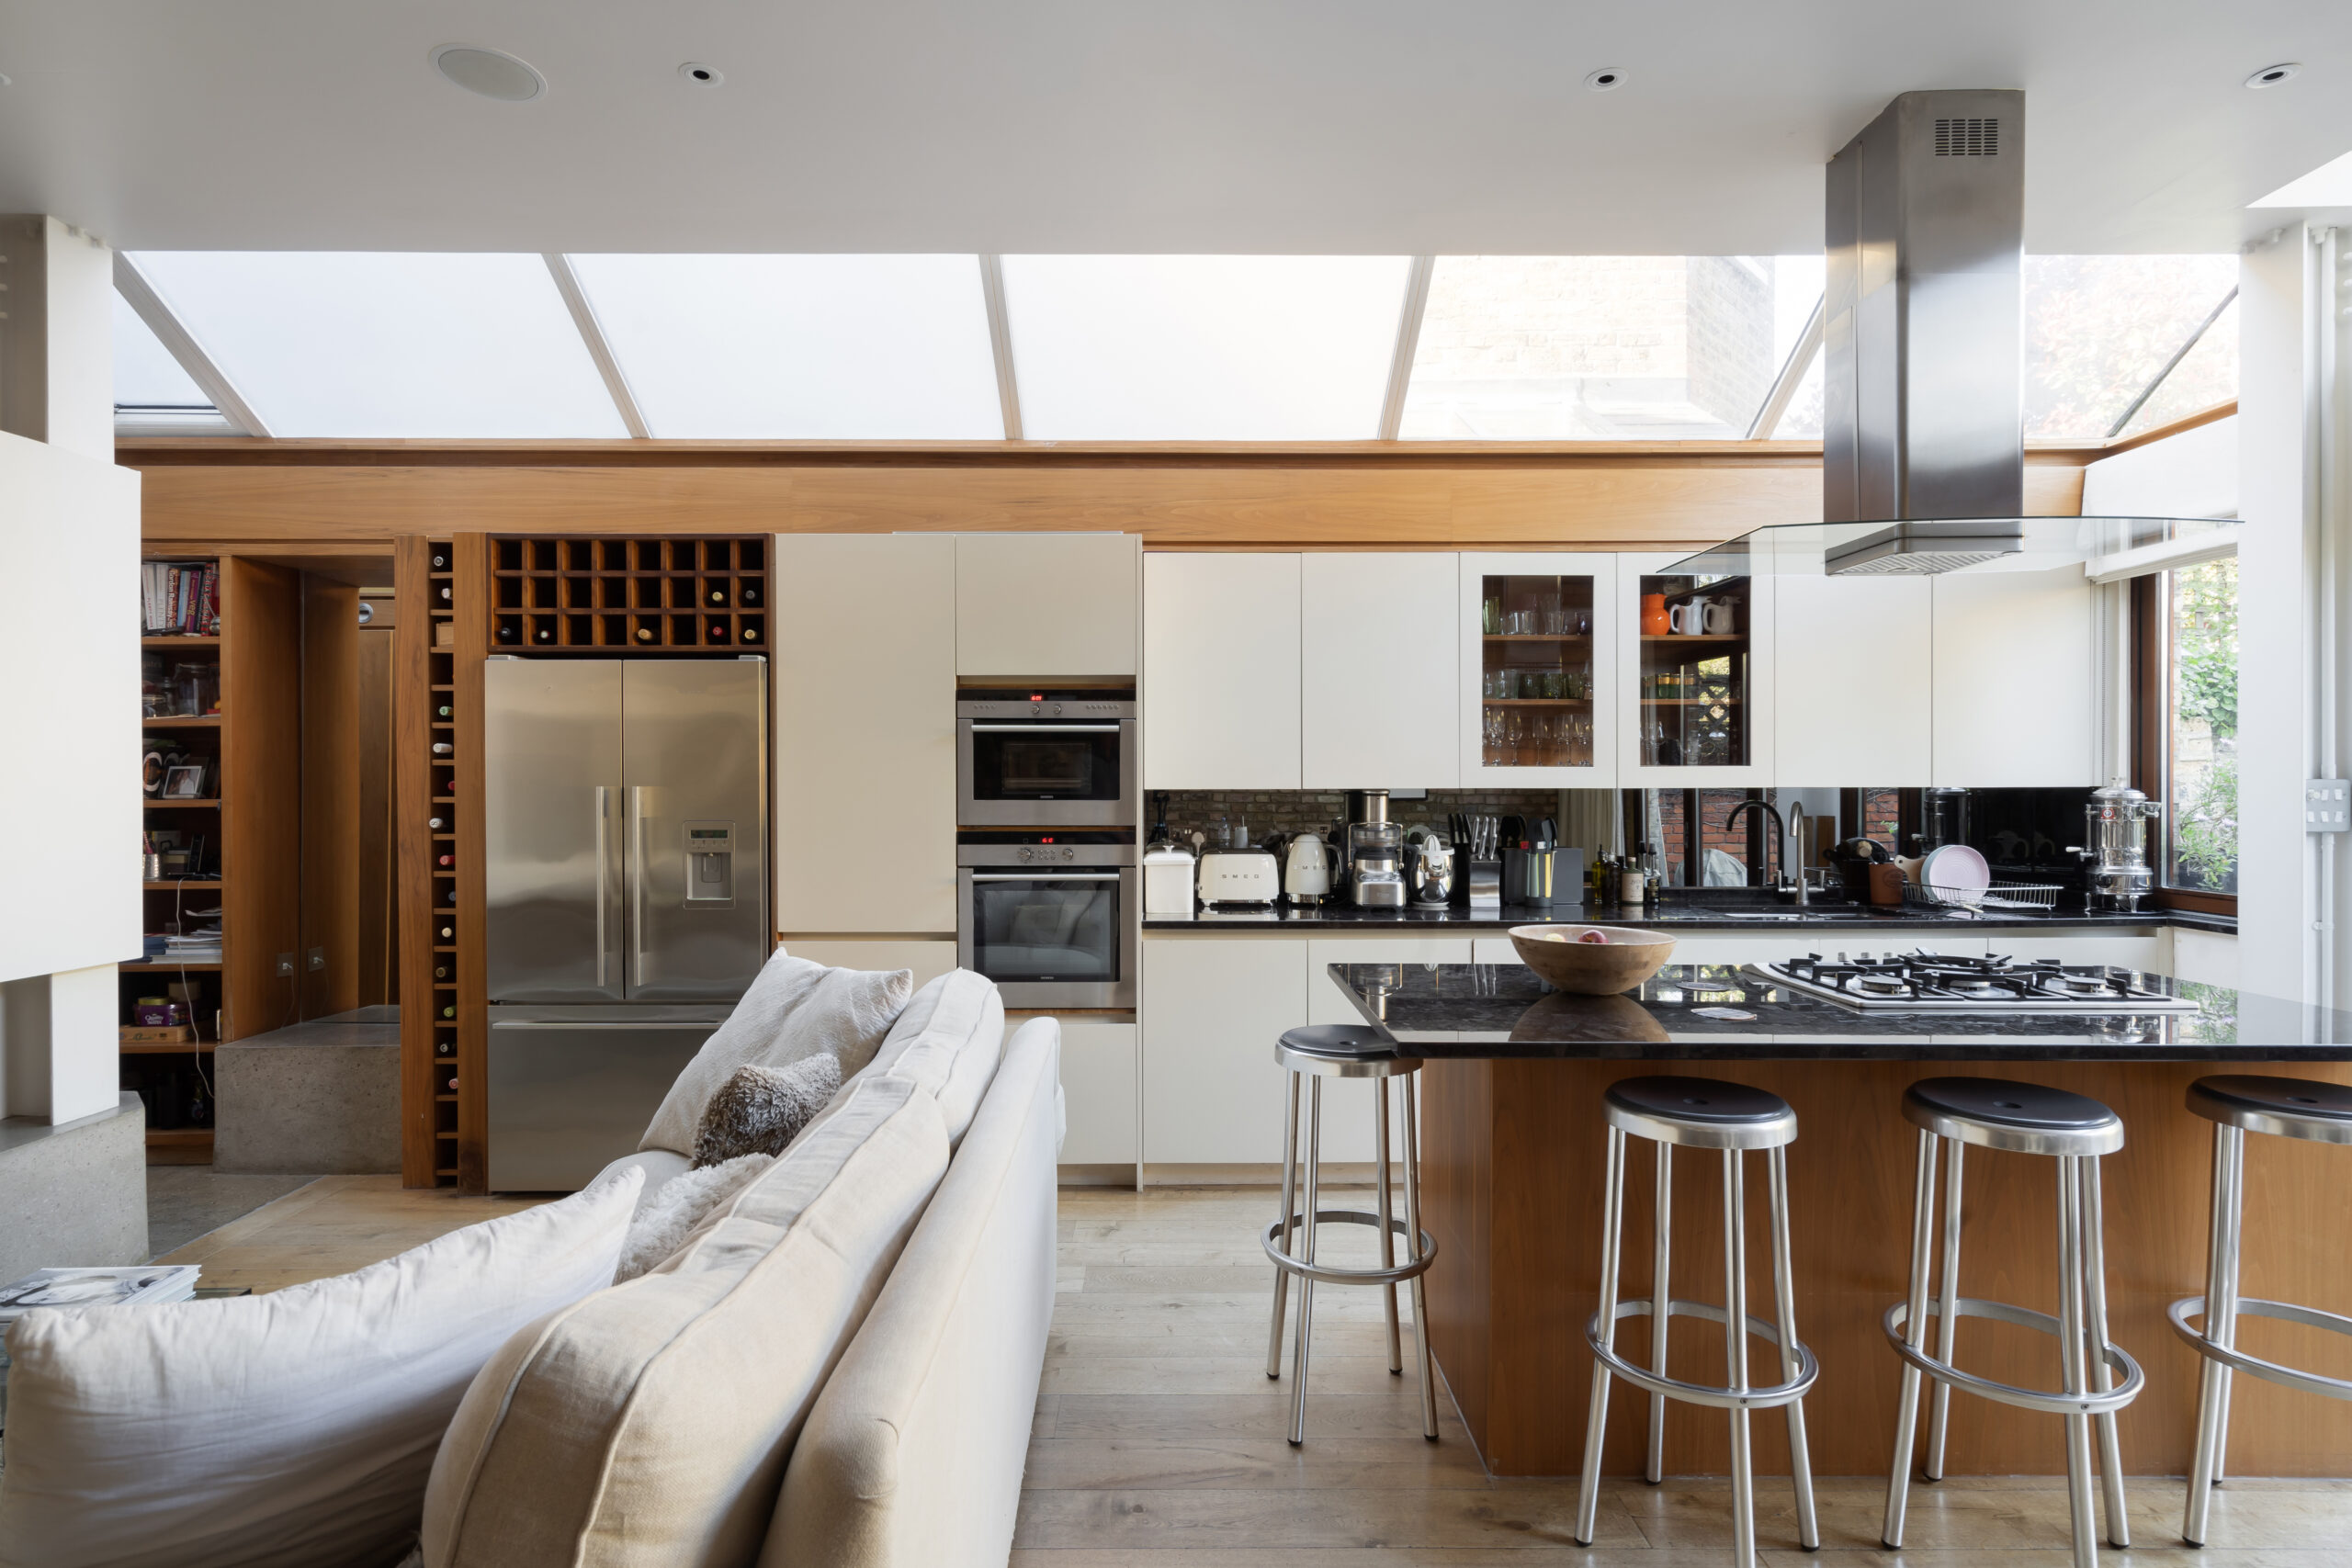 For Sale: Finstock Road, North Kensington W10, contemporary kitchen with skylights